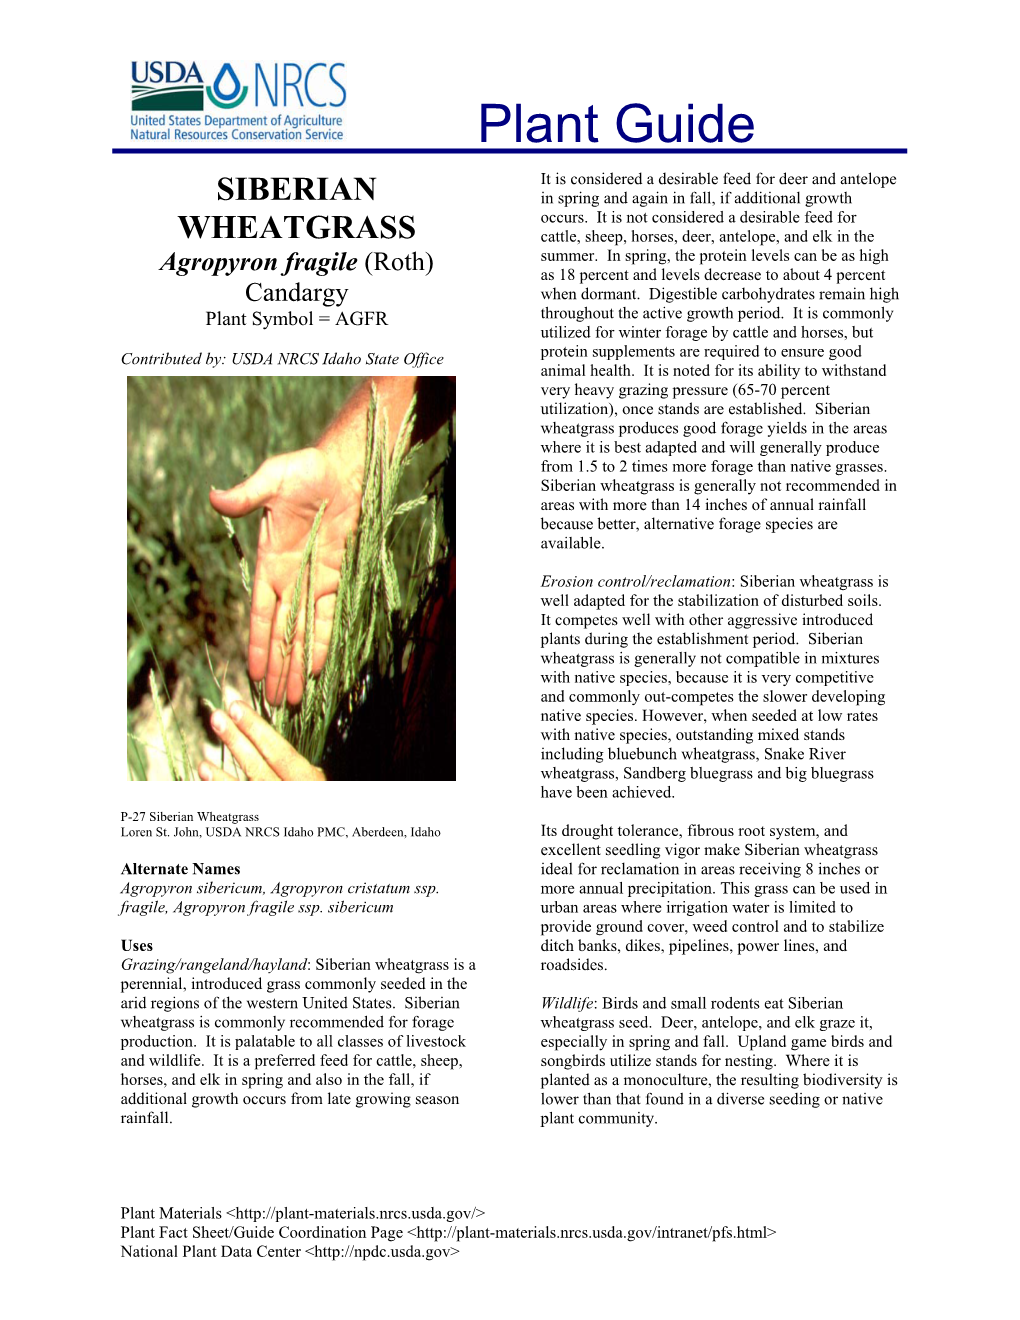 Siberian Wheatgrass Produces Good Forage Yields in the Areas Where It Is Best Adapted and Will Generally Produce from 1.5 to 2 Times More Forage Than Native Grasses